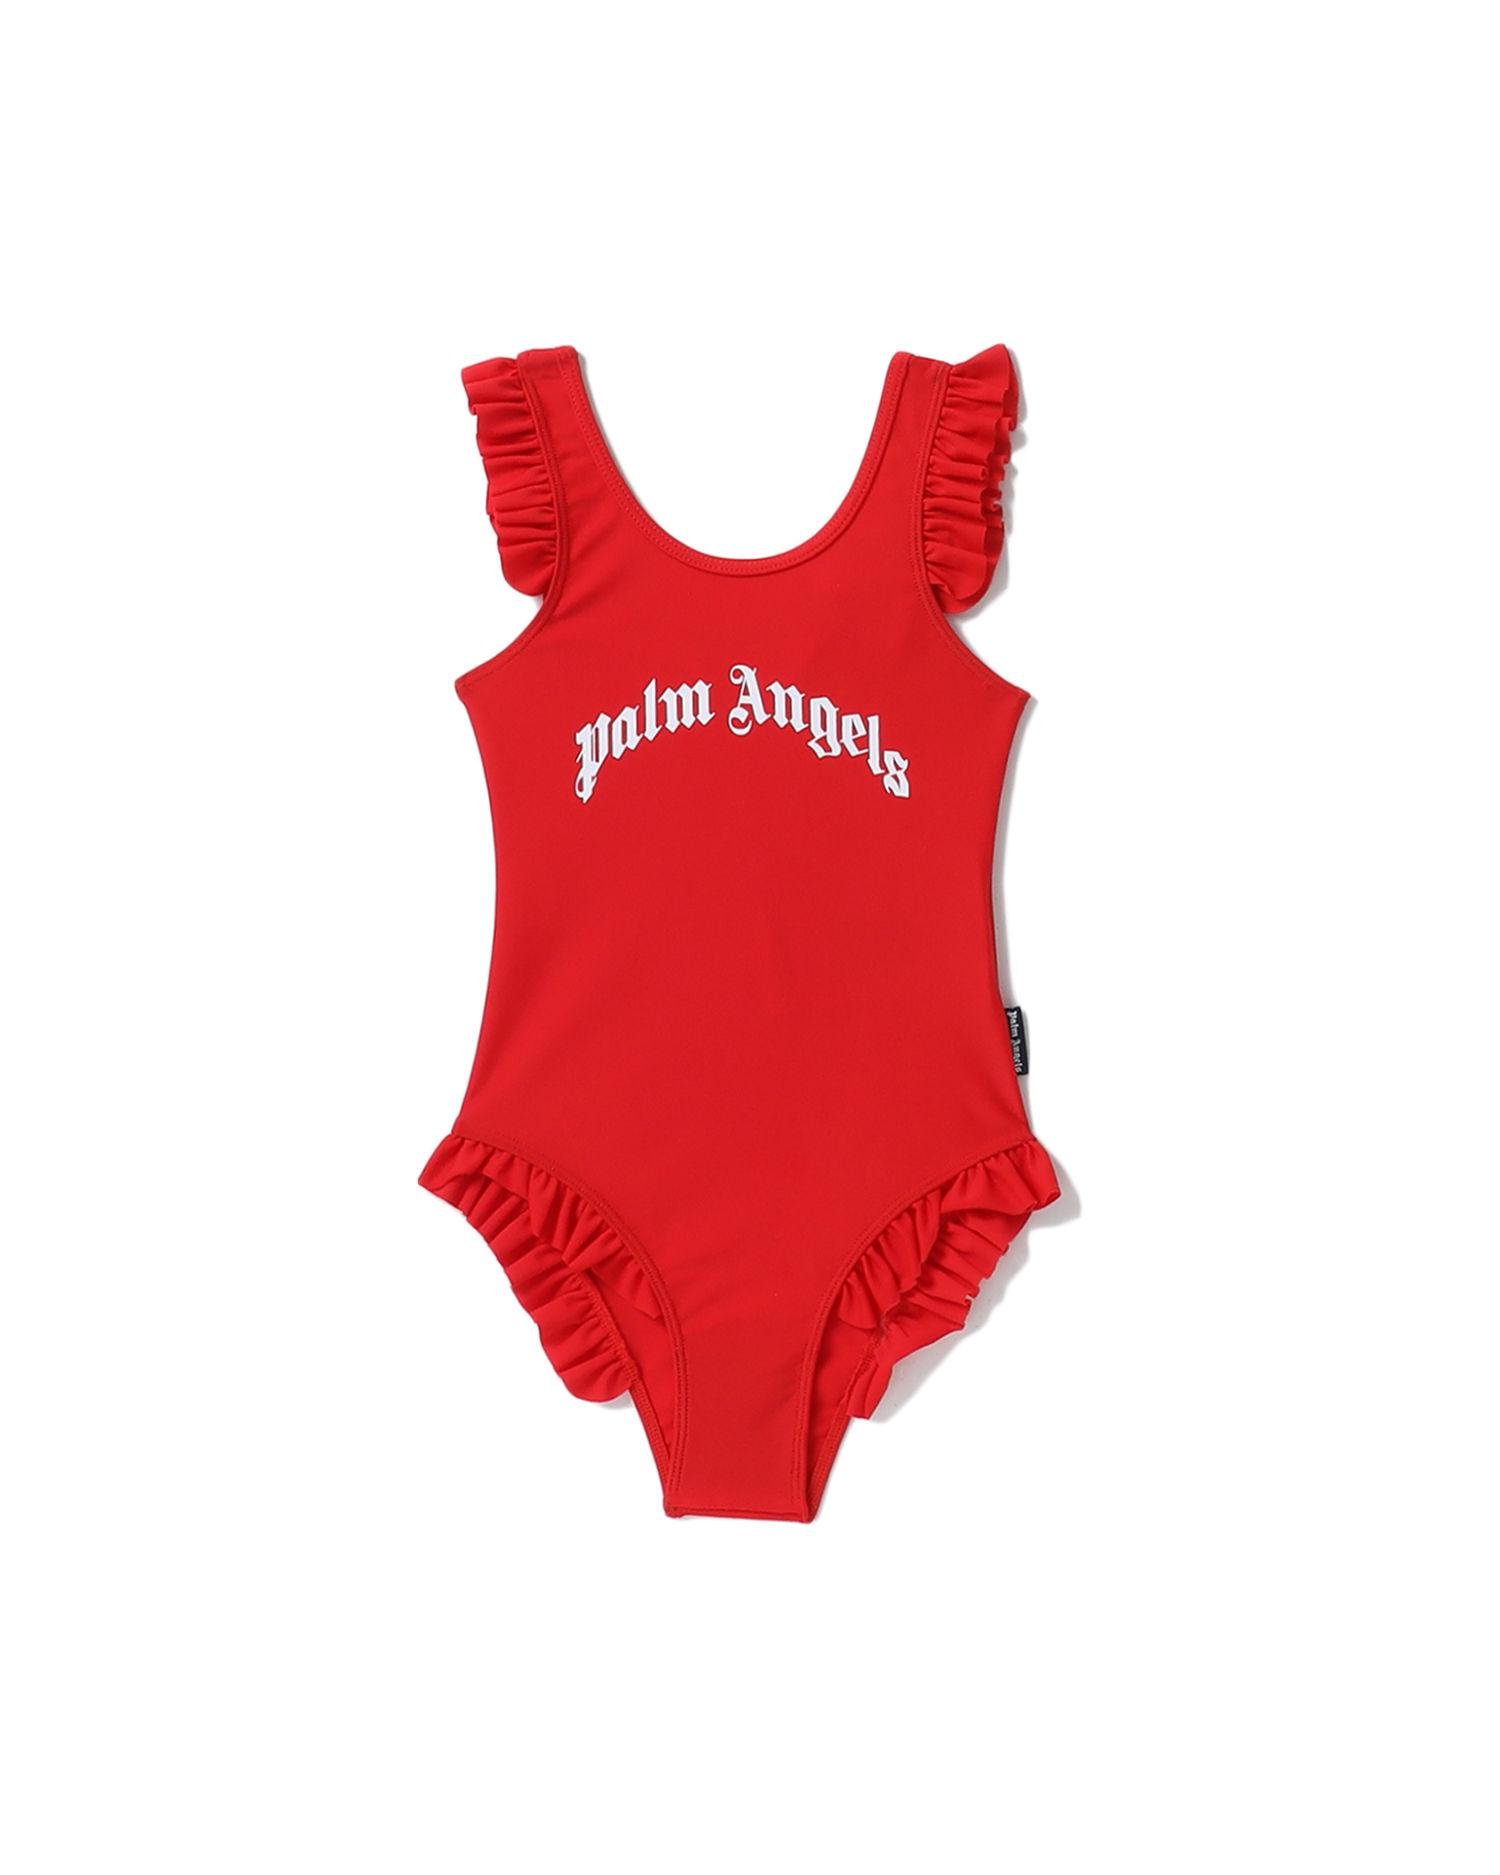 Kids logo swimsuit by PALM ANGELS